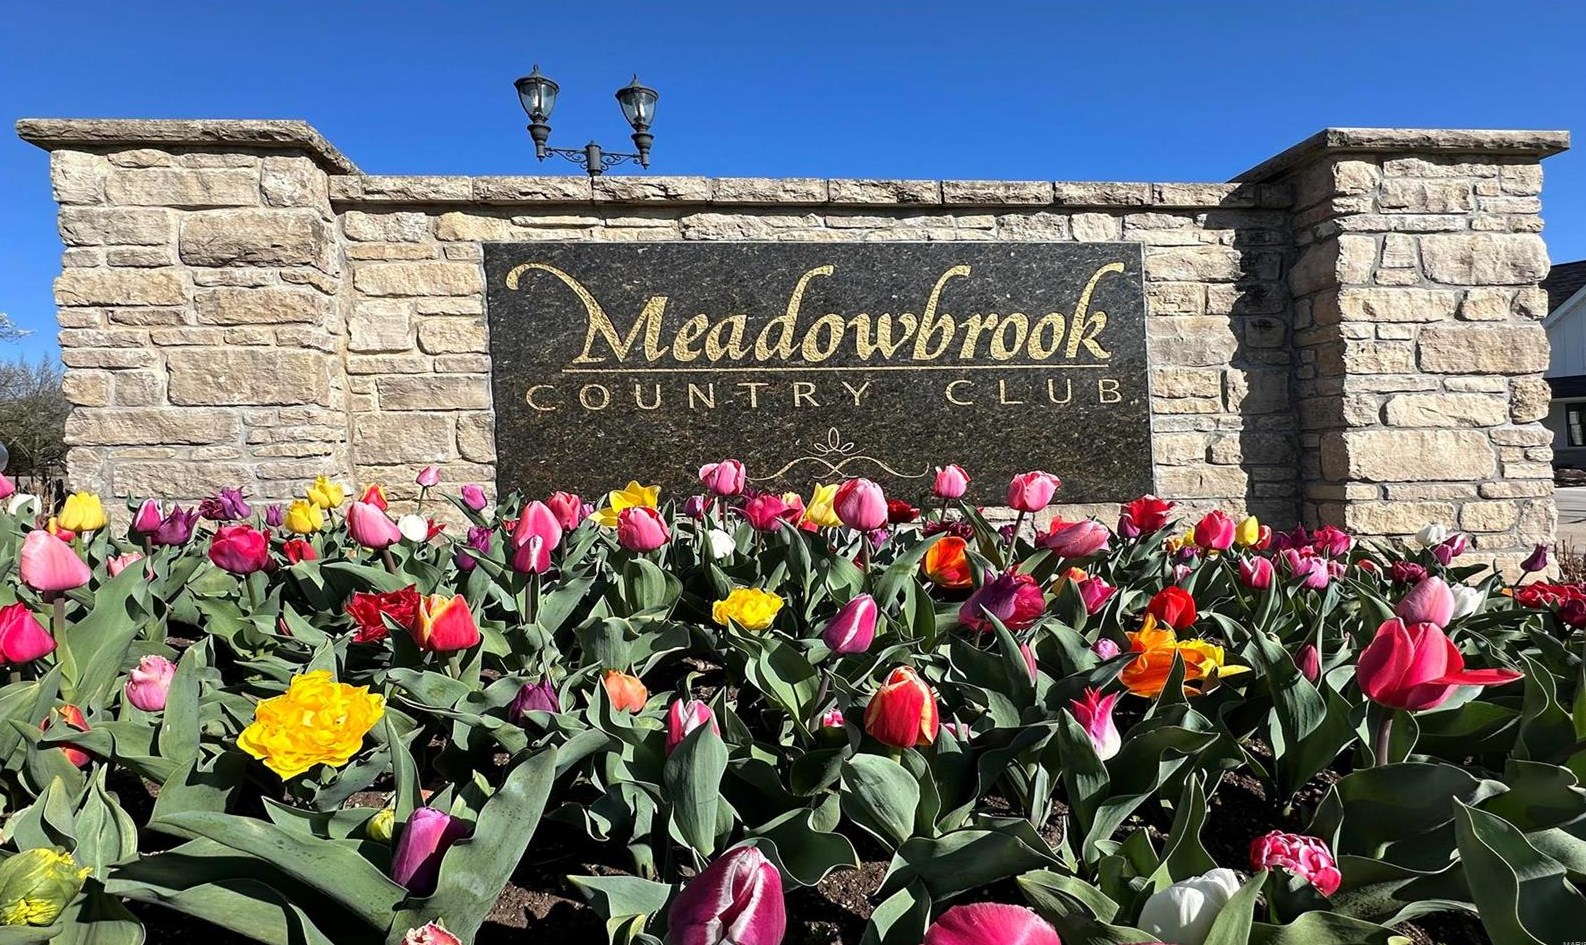 7 Meadowbrook Country Club Est, Wildwood, MO